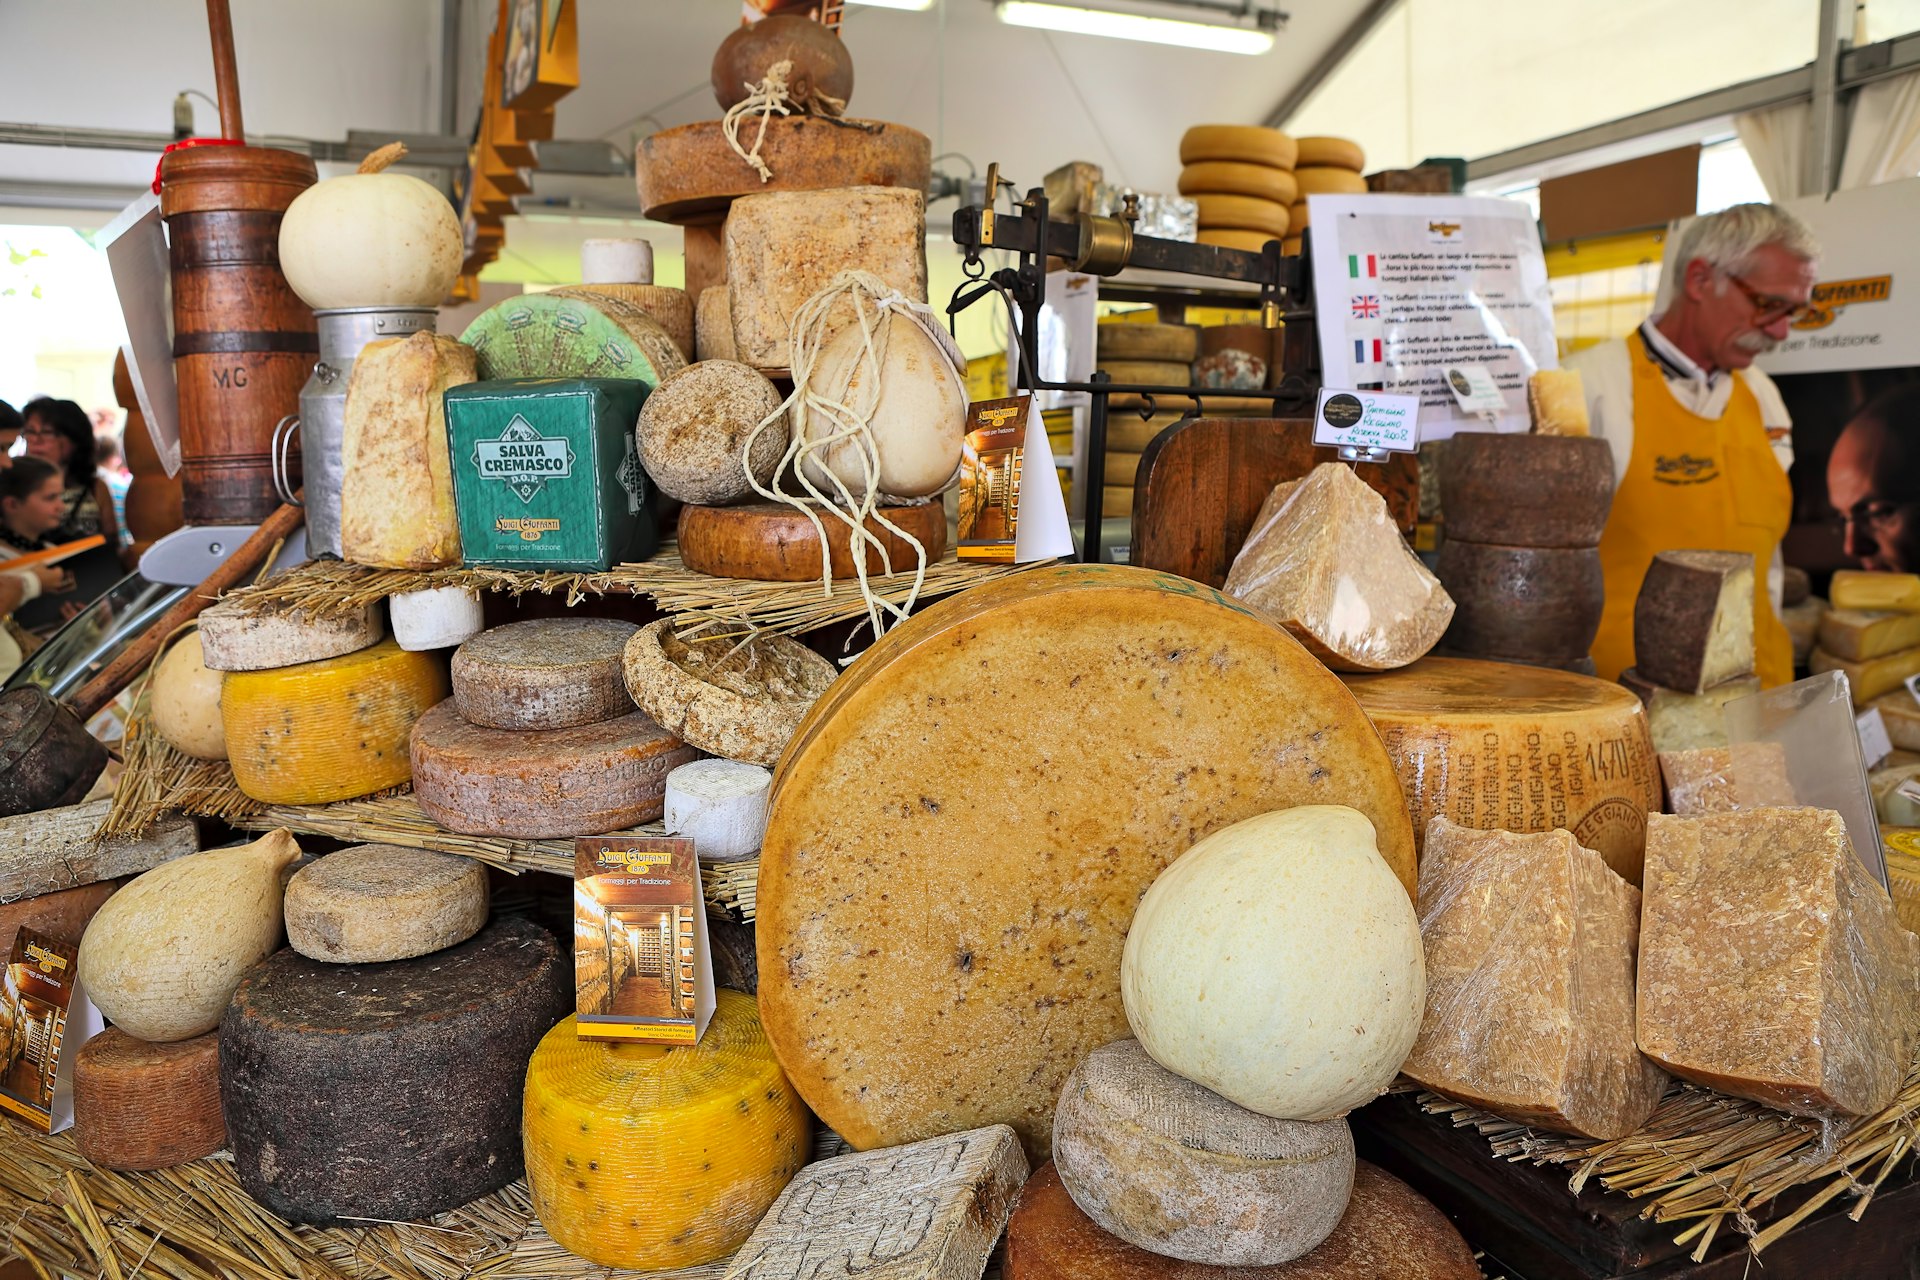 Wheels of mature cheese piled on a stand in Bra, Piedmont, Italy